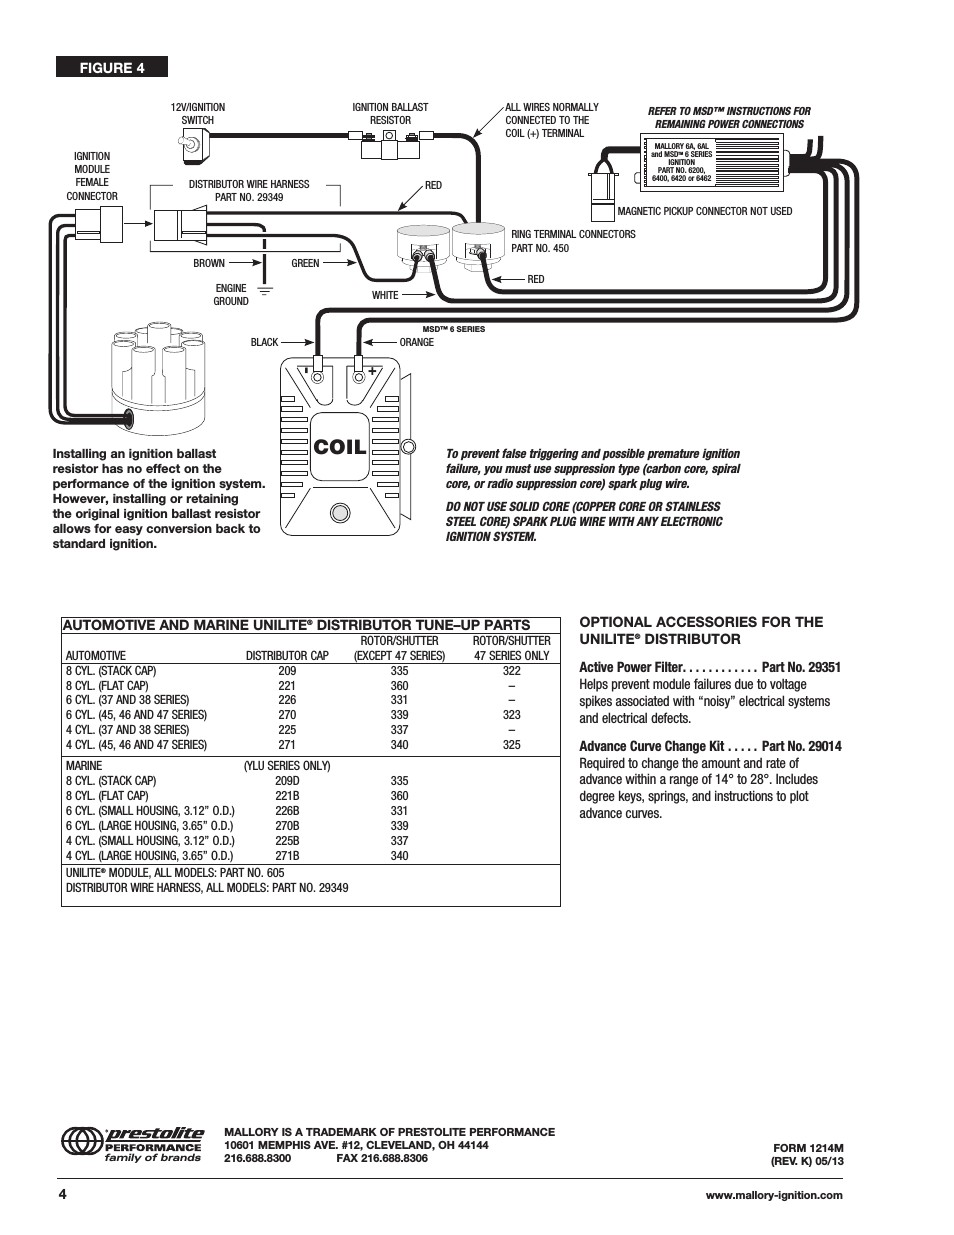 Coil from mallory unilite wiring diagram , source:manualsdir.com.